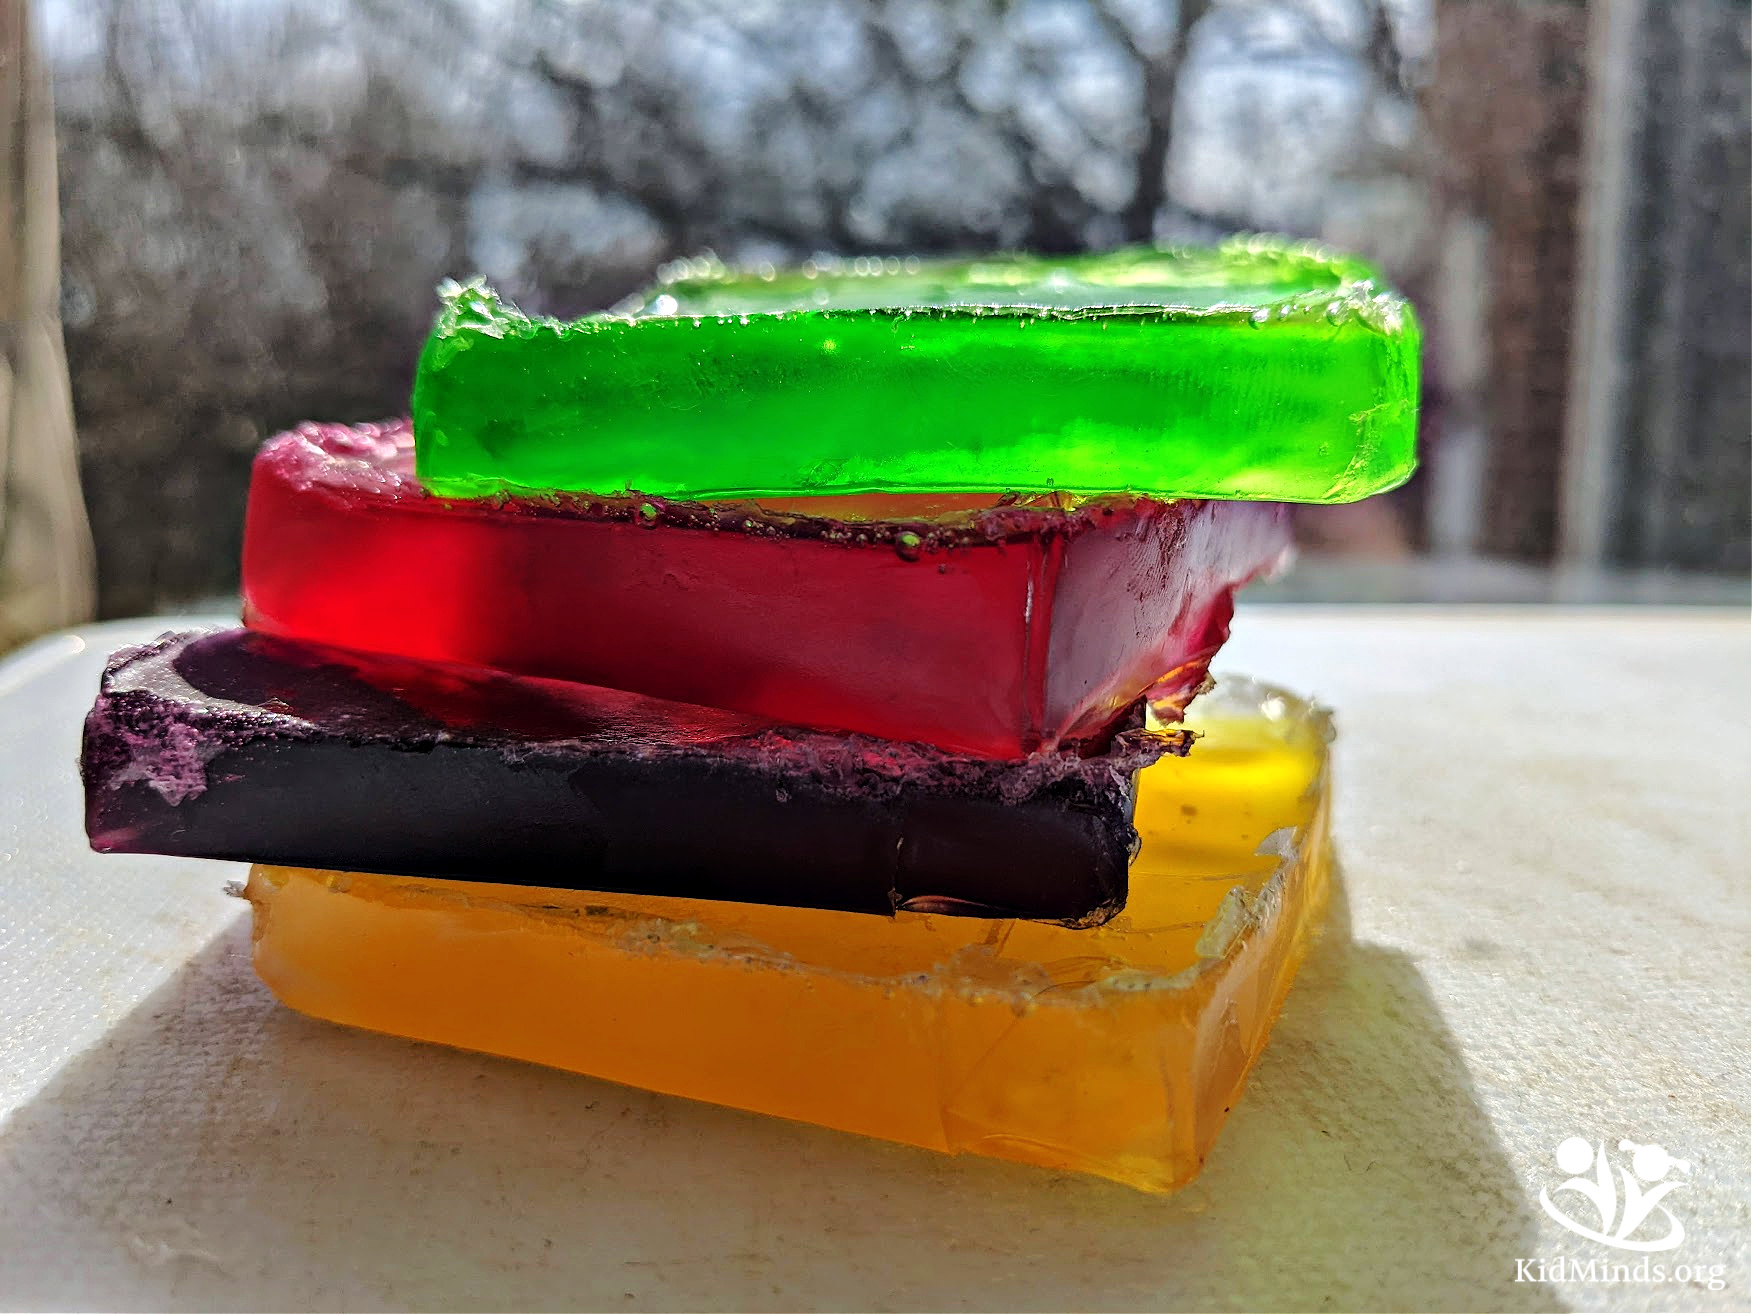 These colorful soap bars are a fun way to spend an hour with your children, learn some science, and mark the arrival of spring in your house. #STEAM #scienceforkids #handsonlearning #kidsactivities #laughingkidslearn #kidminds